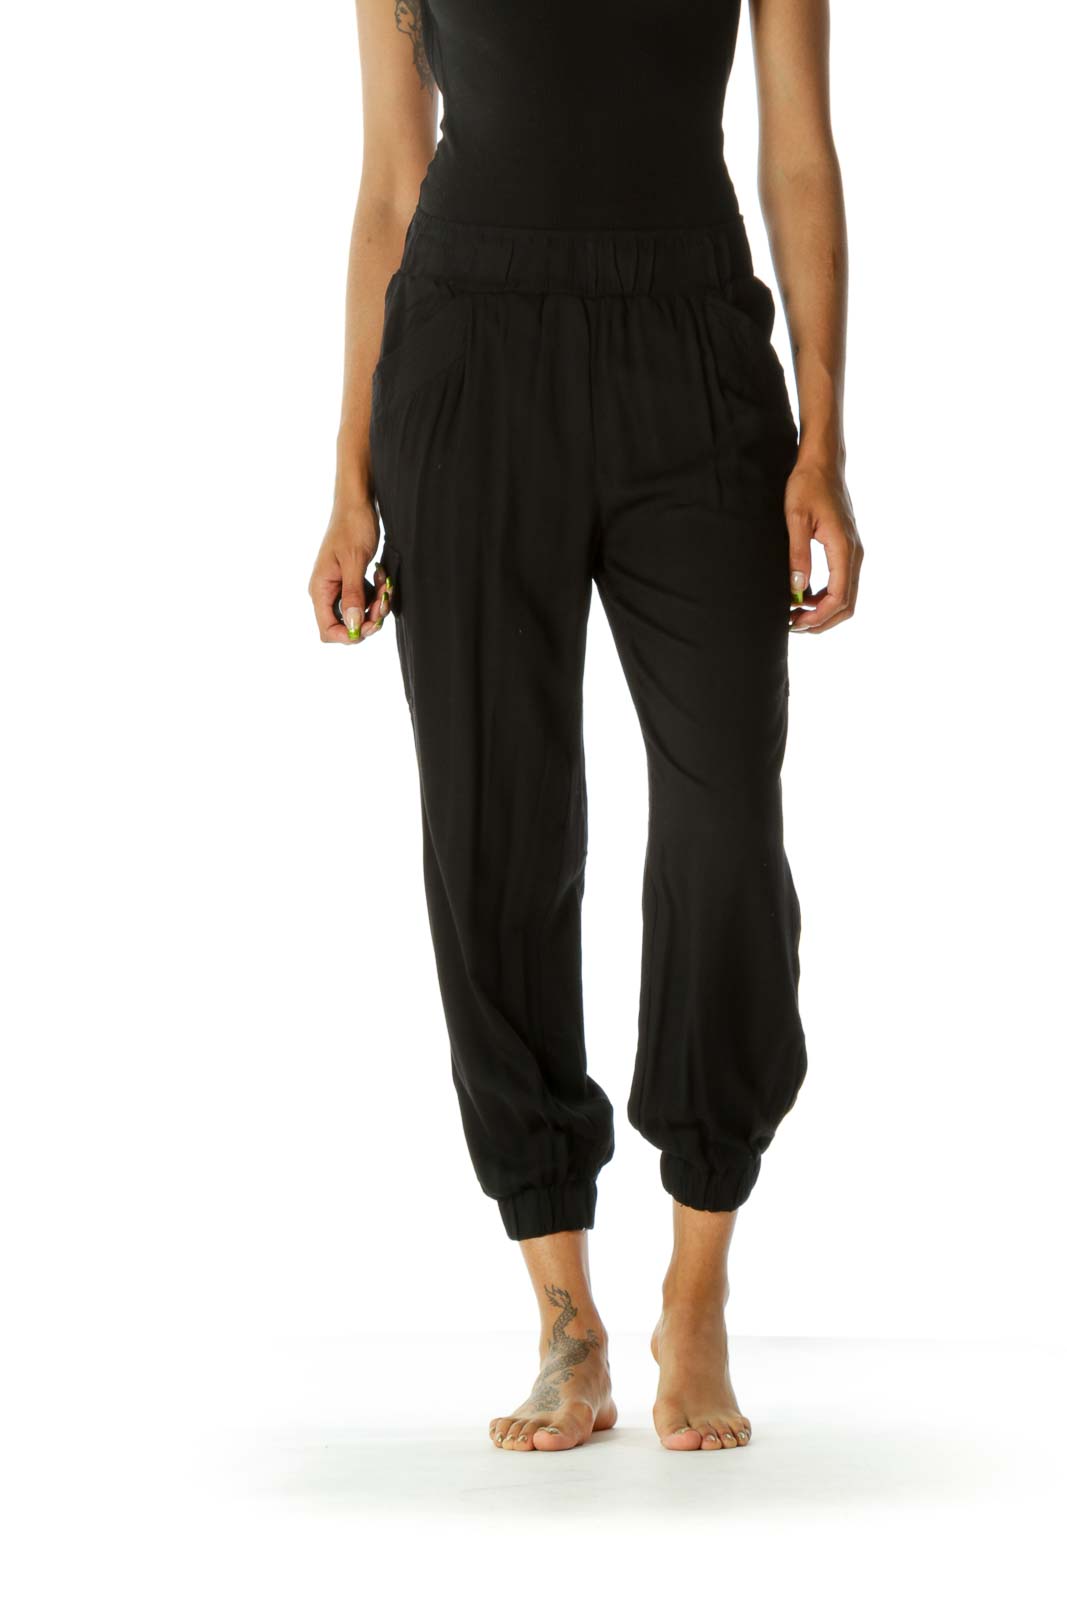 Black Pocketed Loose Elastic Ankles and Waistband Pants Front